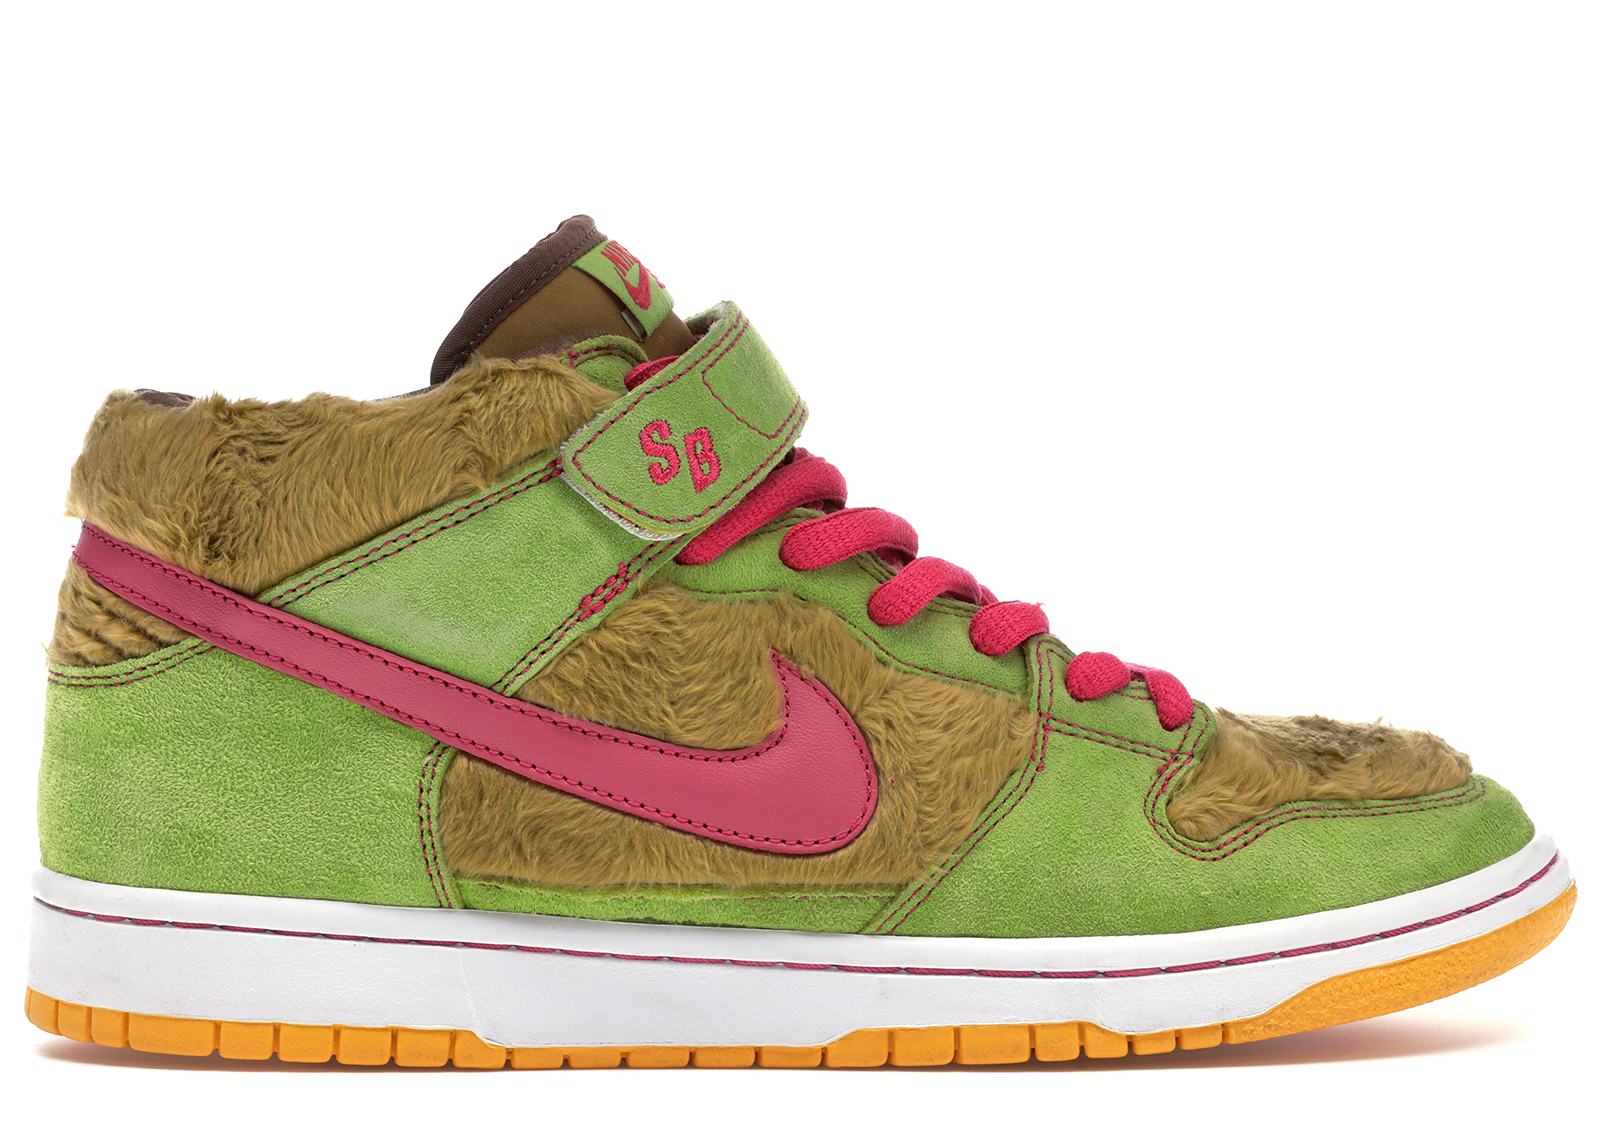 Buy Nike SB SB Dunk Mid Shoes & New Sneakers - StockX